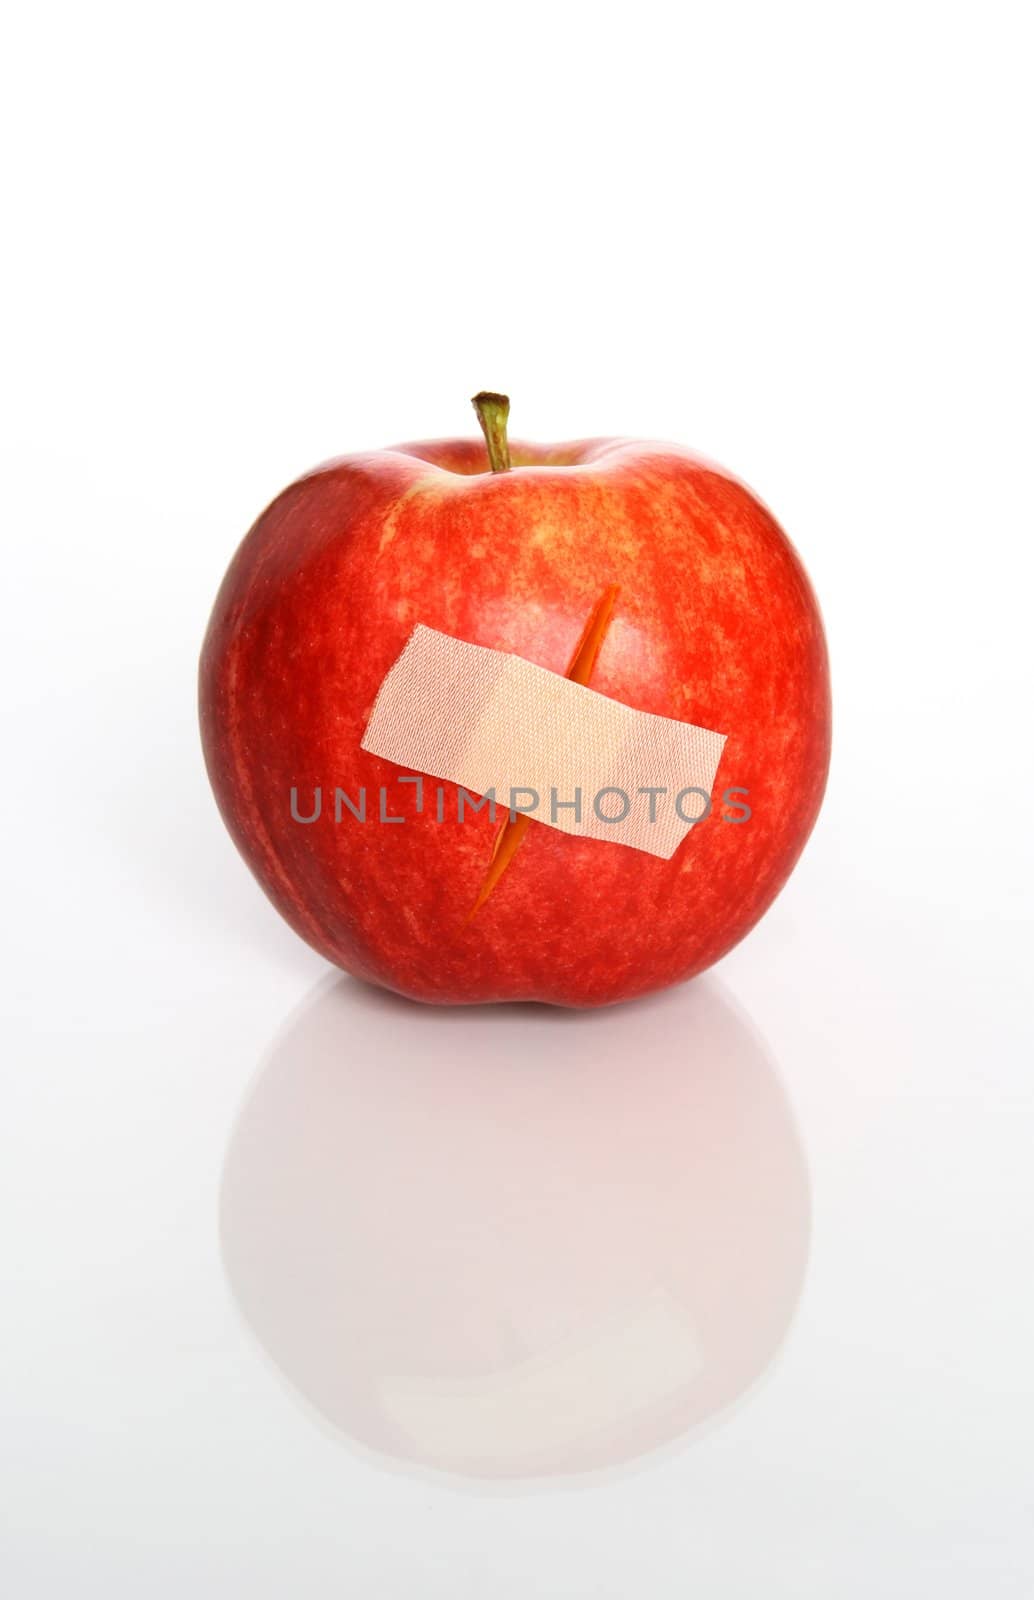 Injured red apple with a plaster.